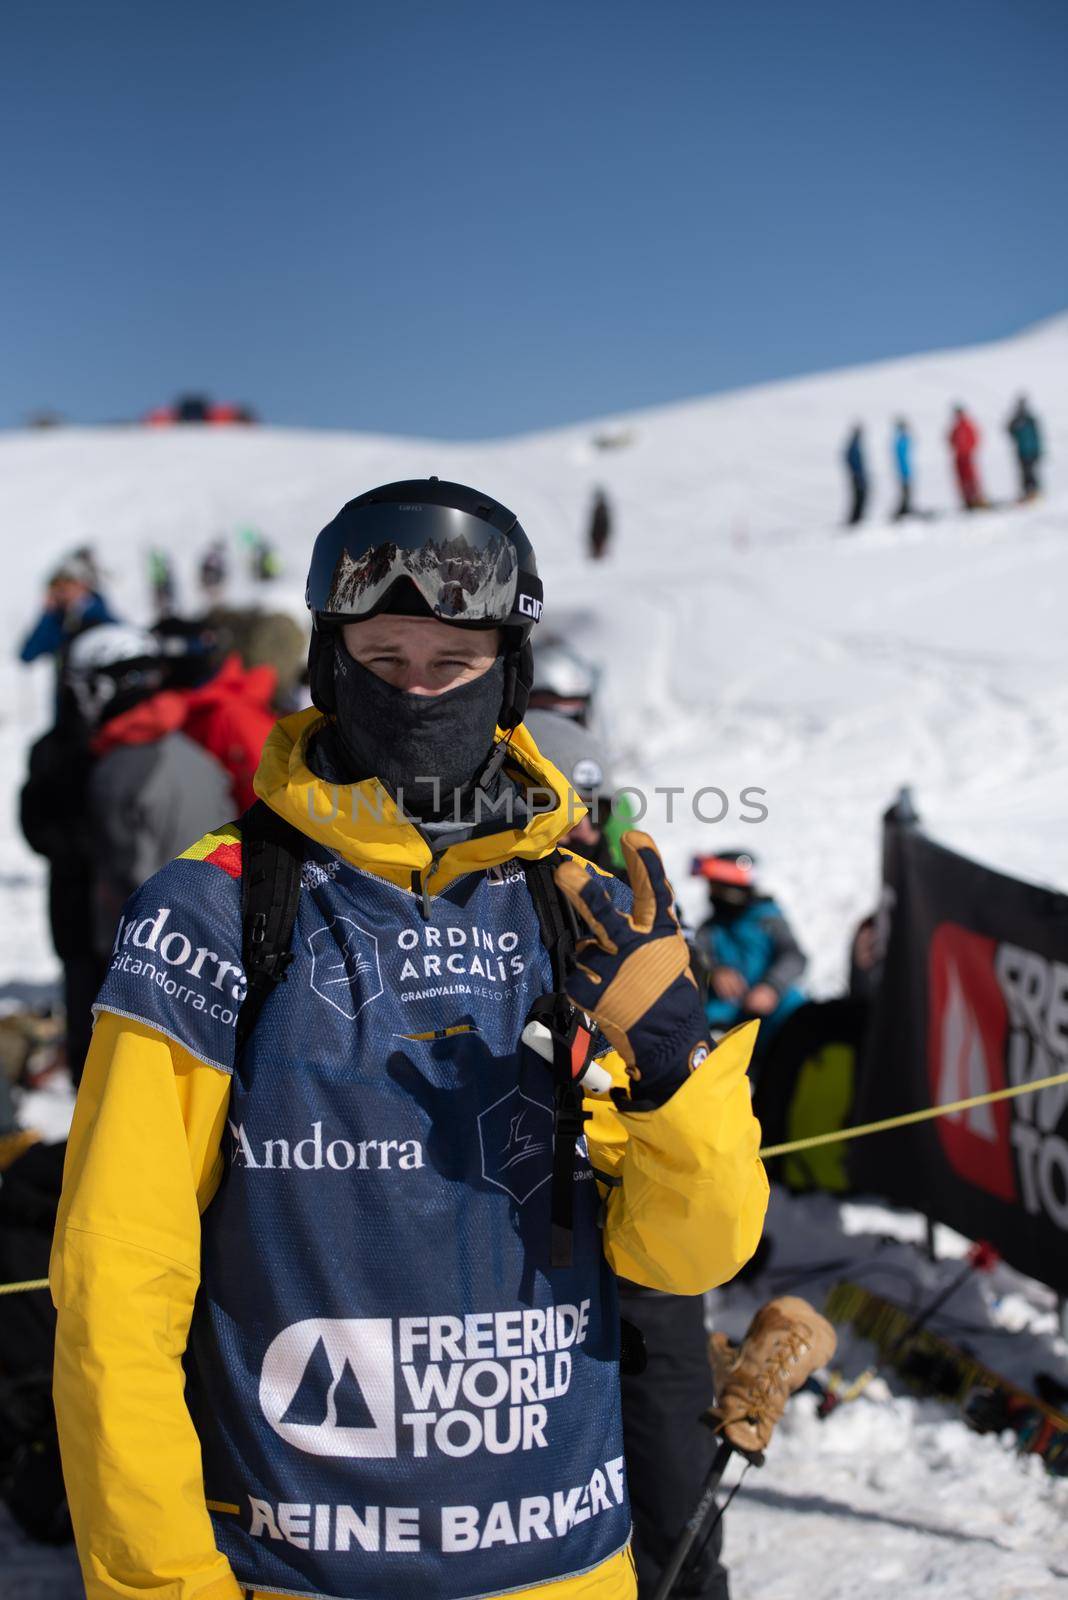 Ordino Arcalis, Andorra: 2021 February 24: Reine Bakerded in action at the Freeride World Tour 2021 Step 2 at Ordino Alcalis in Andorra in the winter of 2021.